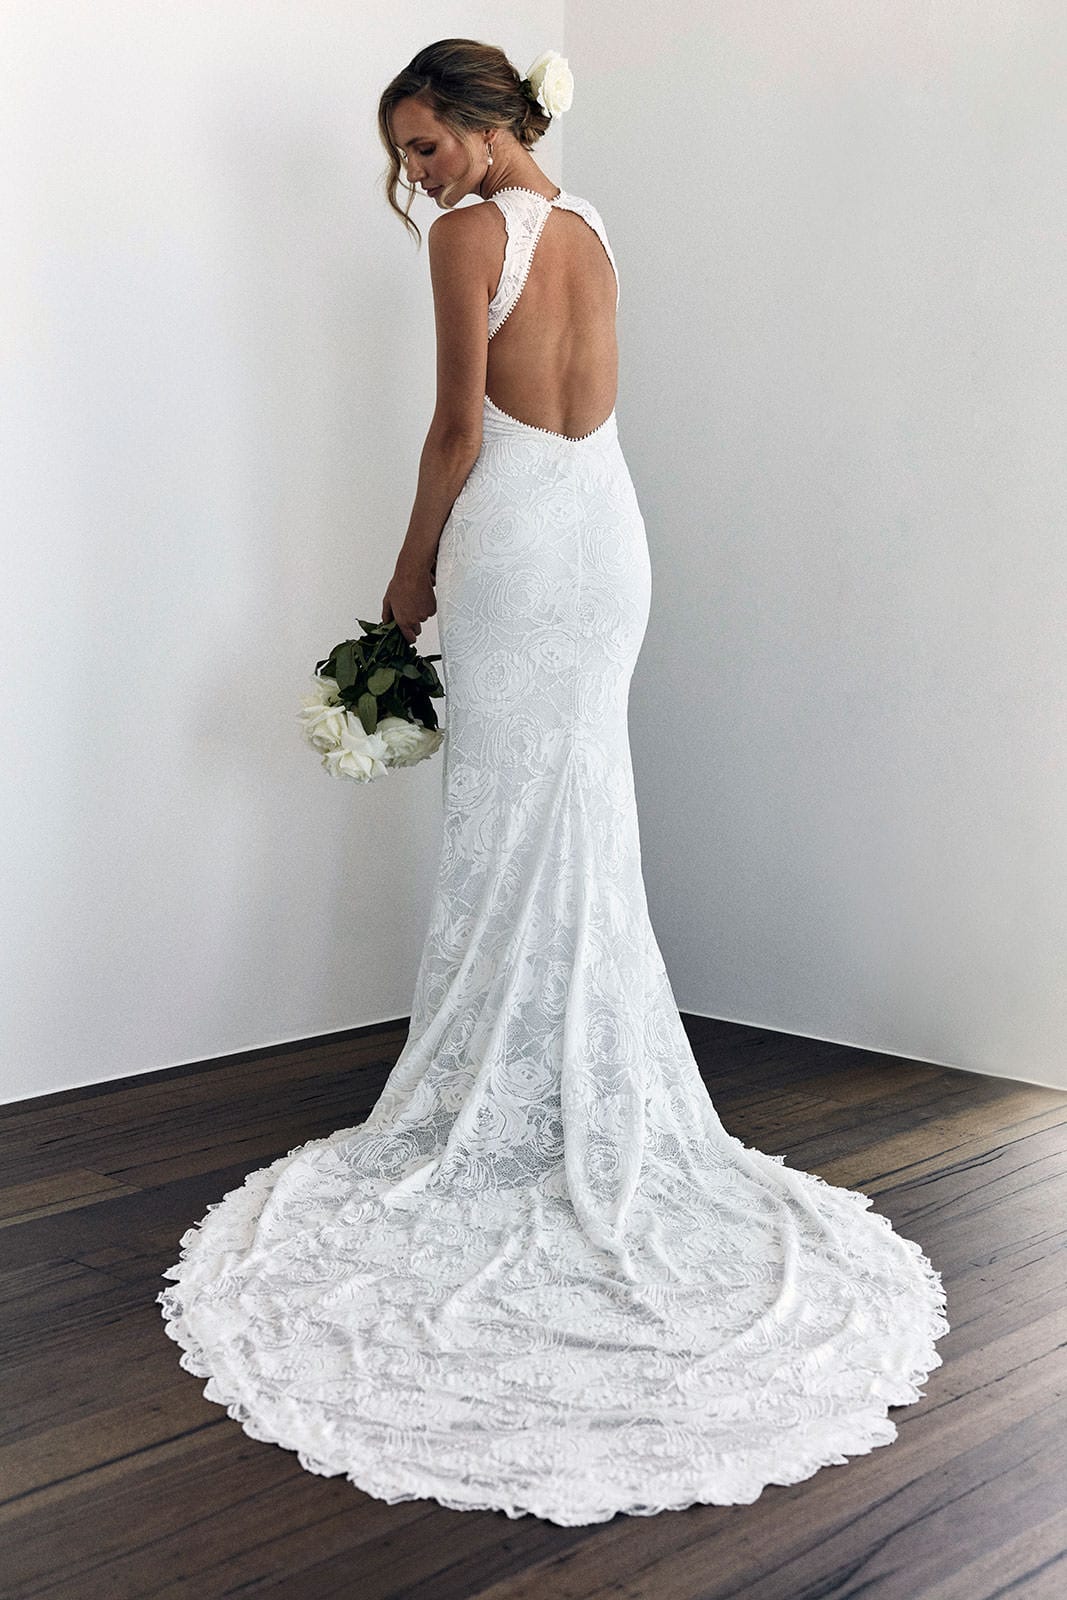 Alexandra Rose Gown | Lace Wedding Dress | Made to Order Standard ...